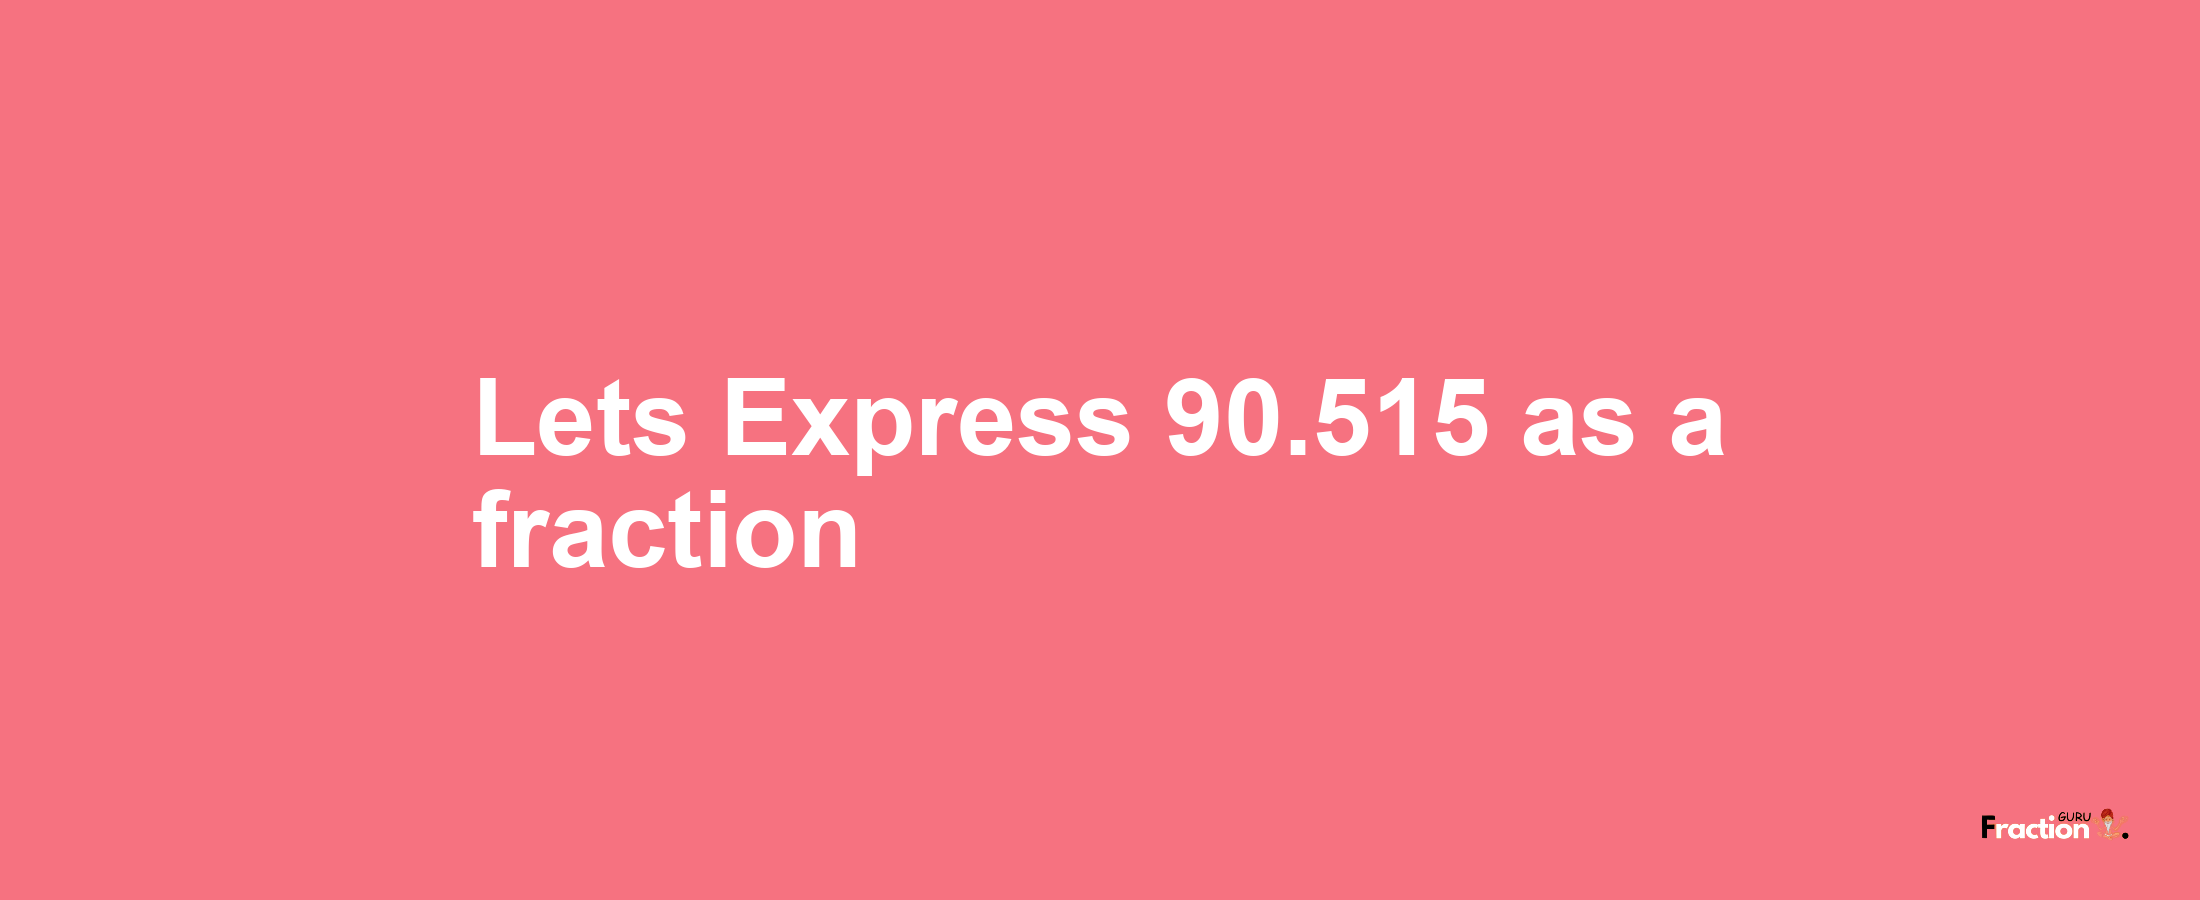 Lets Express 90.515 as afraction